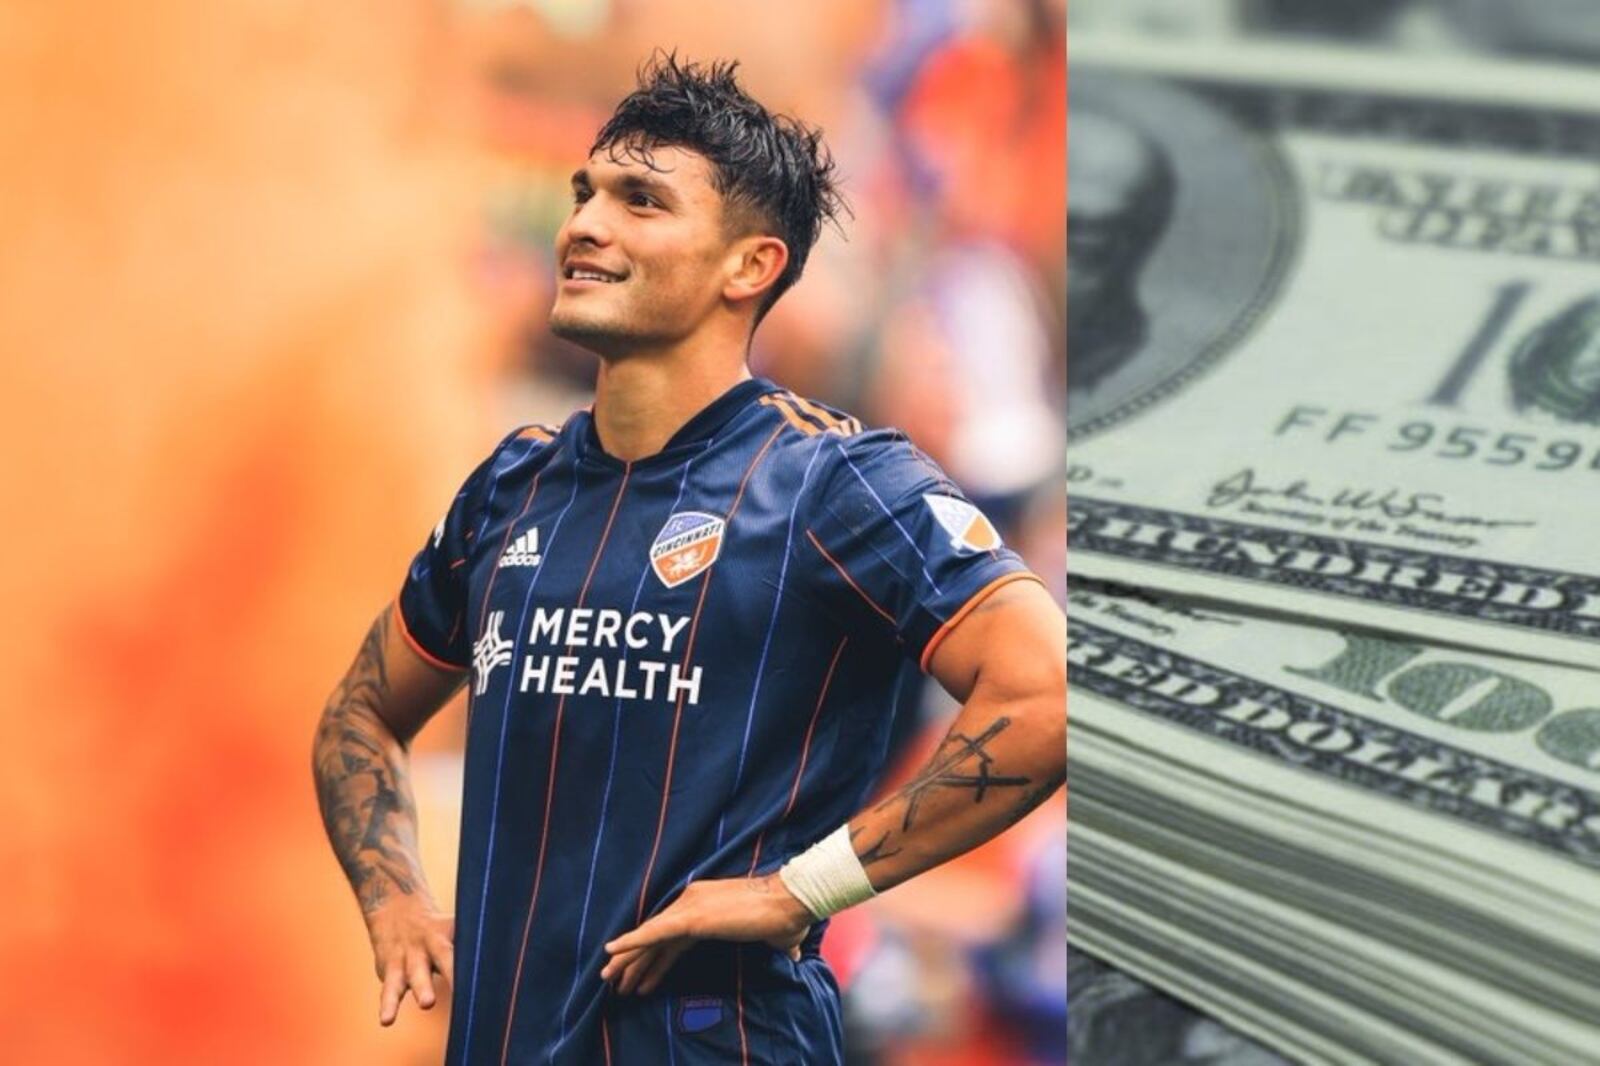 The incredible millionaire rise that Brandon Vázquez has had in the MLS